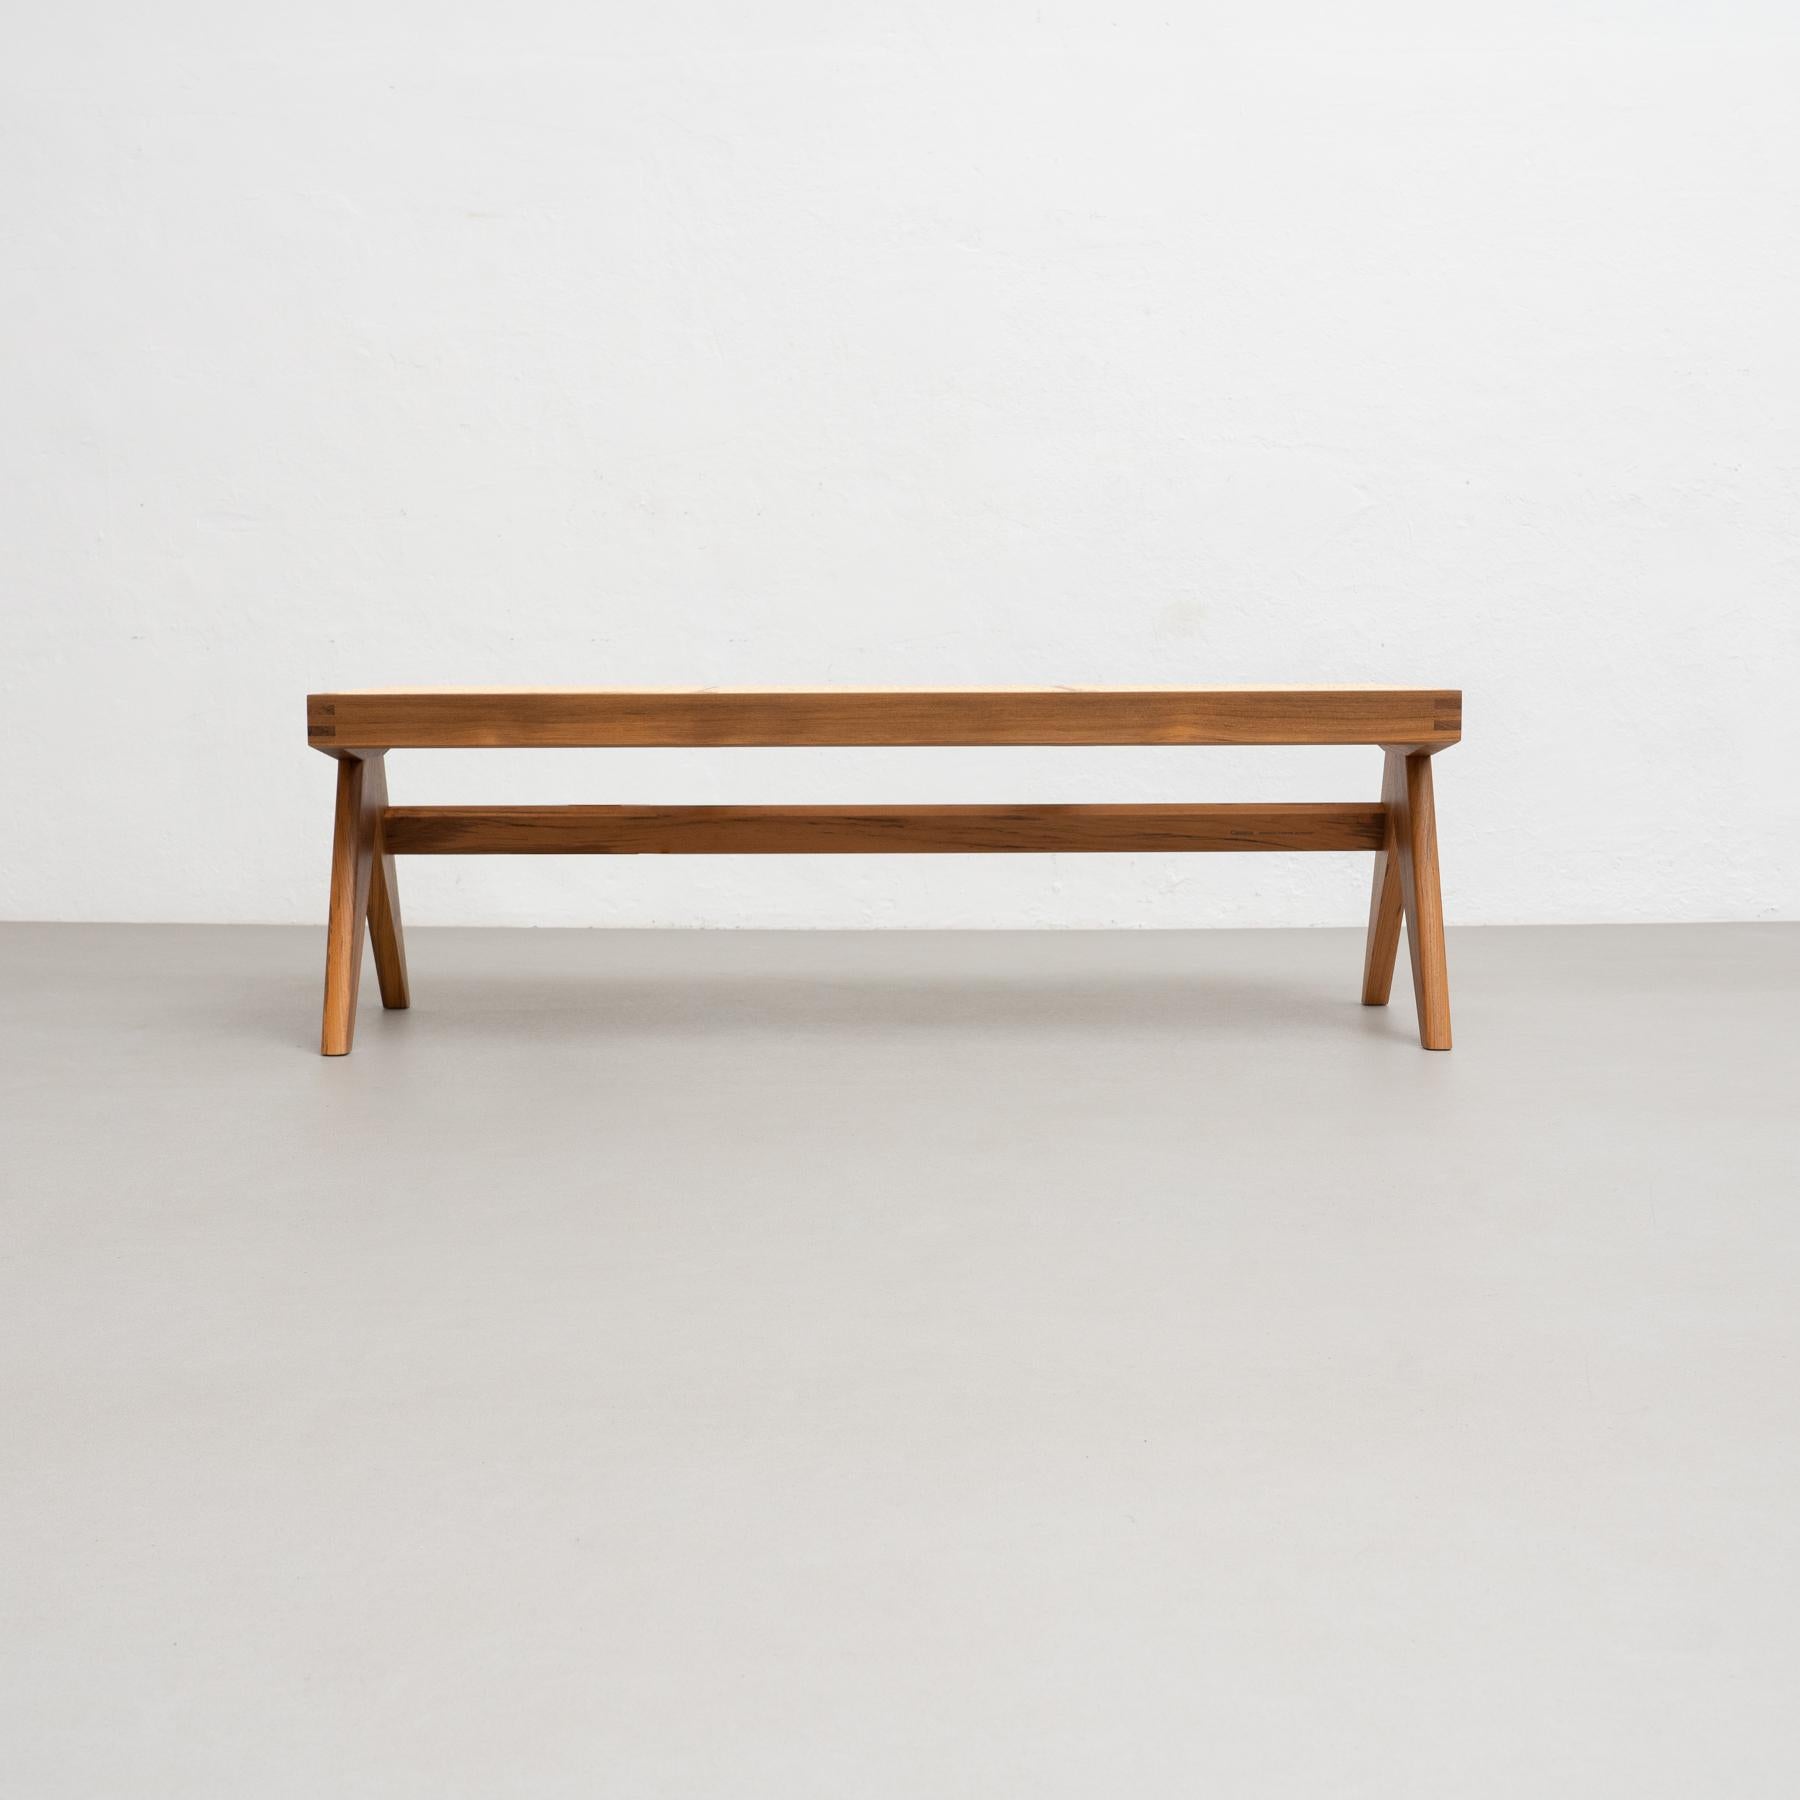 Contemporary Pierre Jeanneret 057 Civil Bench, Wood and Woven Viennese Cane